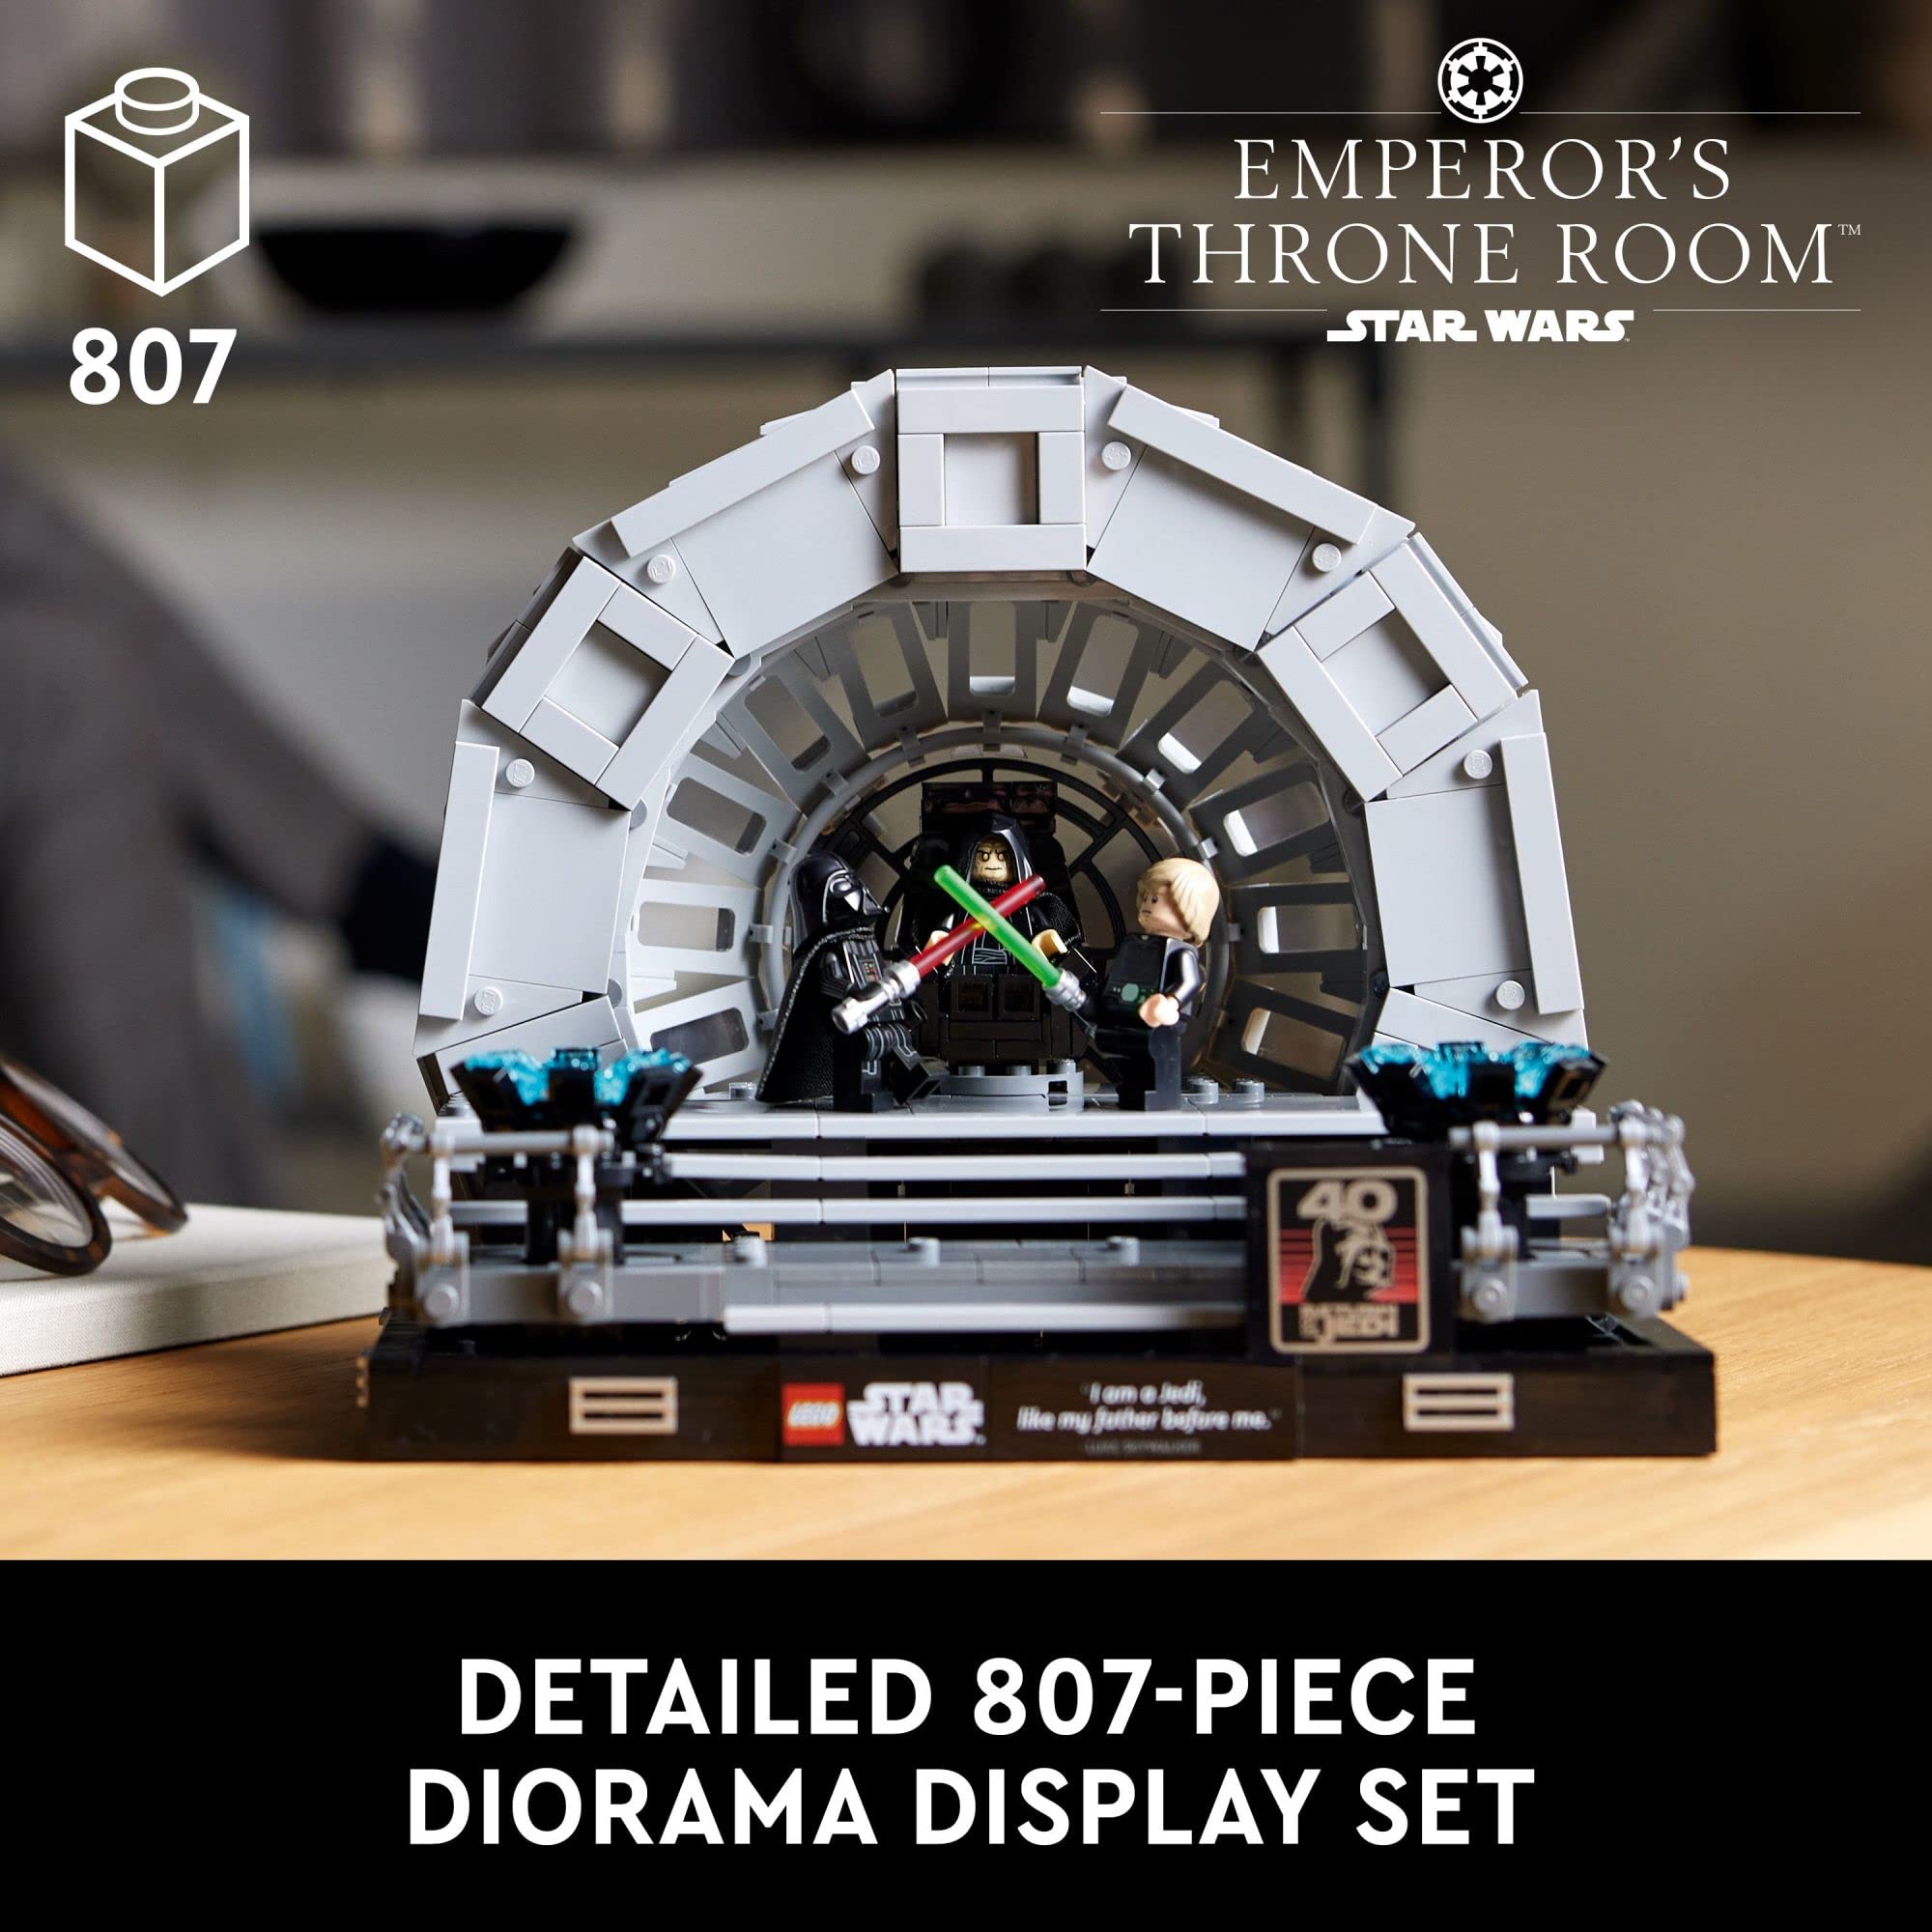 LEGO Star Wars Emperor’s Throne Room Diorama 75352 Building Set for Adults, Classic Star Wars Collectible for Display with Darth Vader Minifigure, Fun Birthday Gift for Men and Women